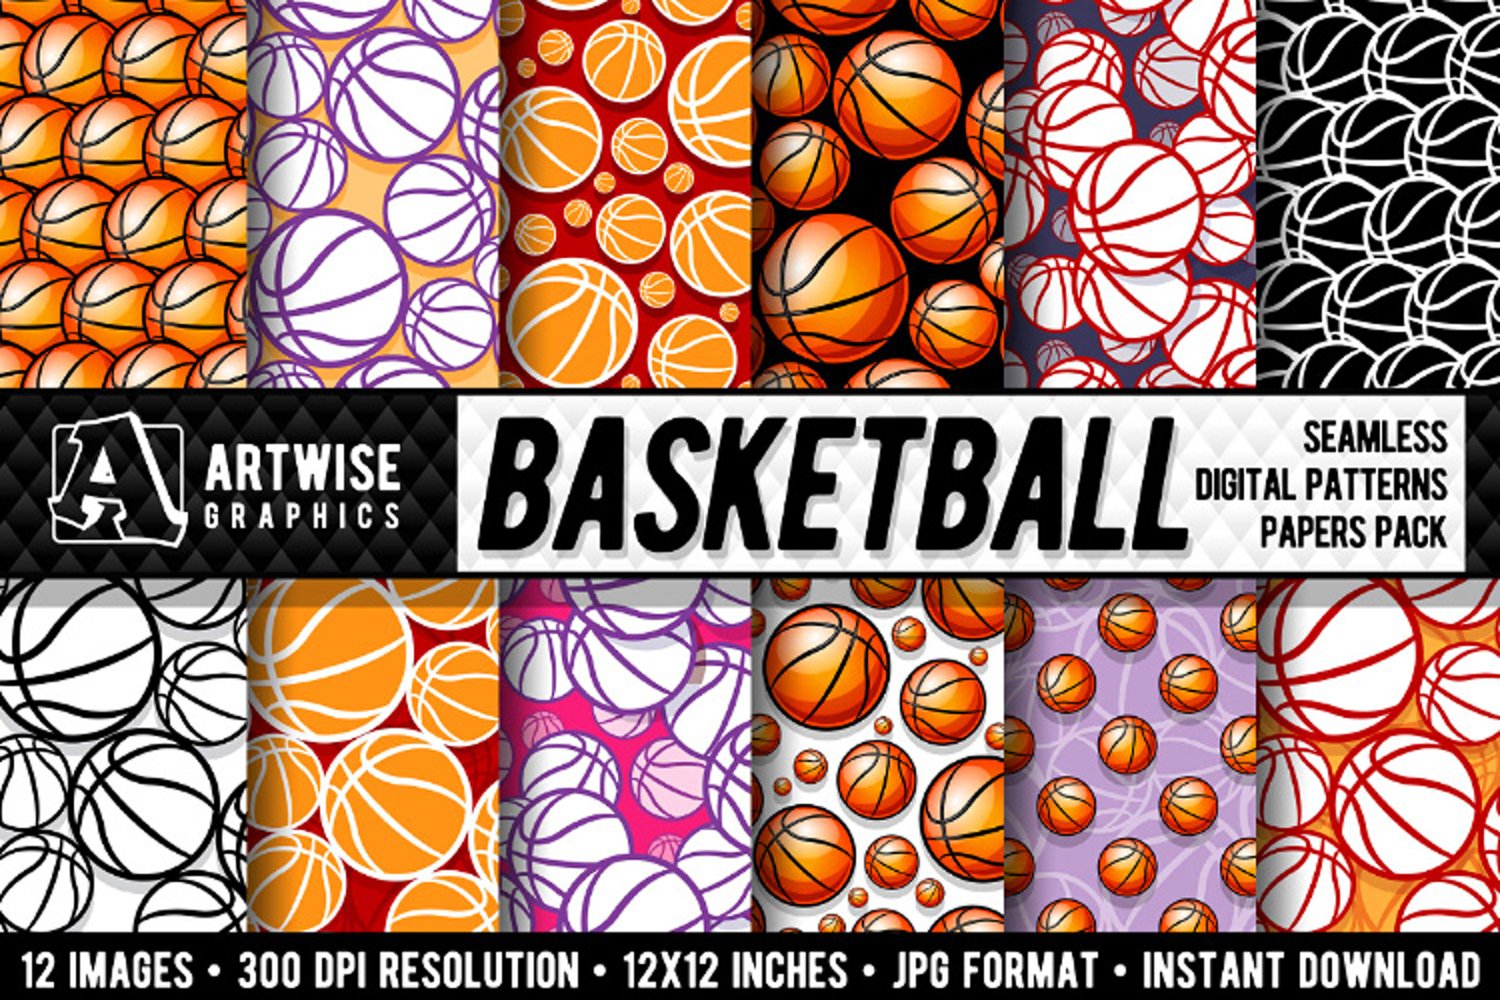 Cover image of Basketball Digital Paper Seamless Pattern Graphics.